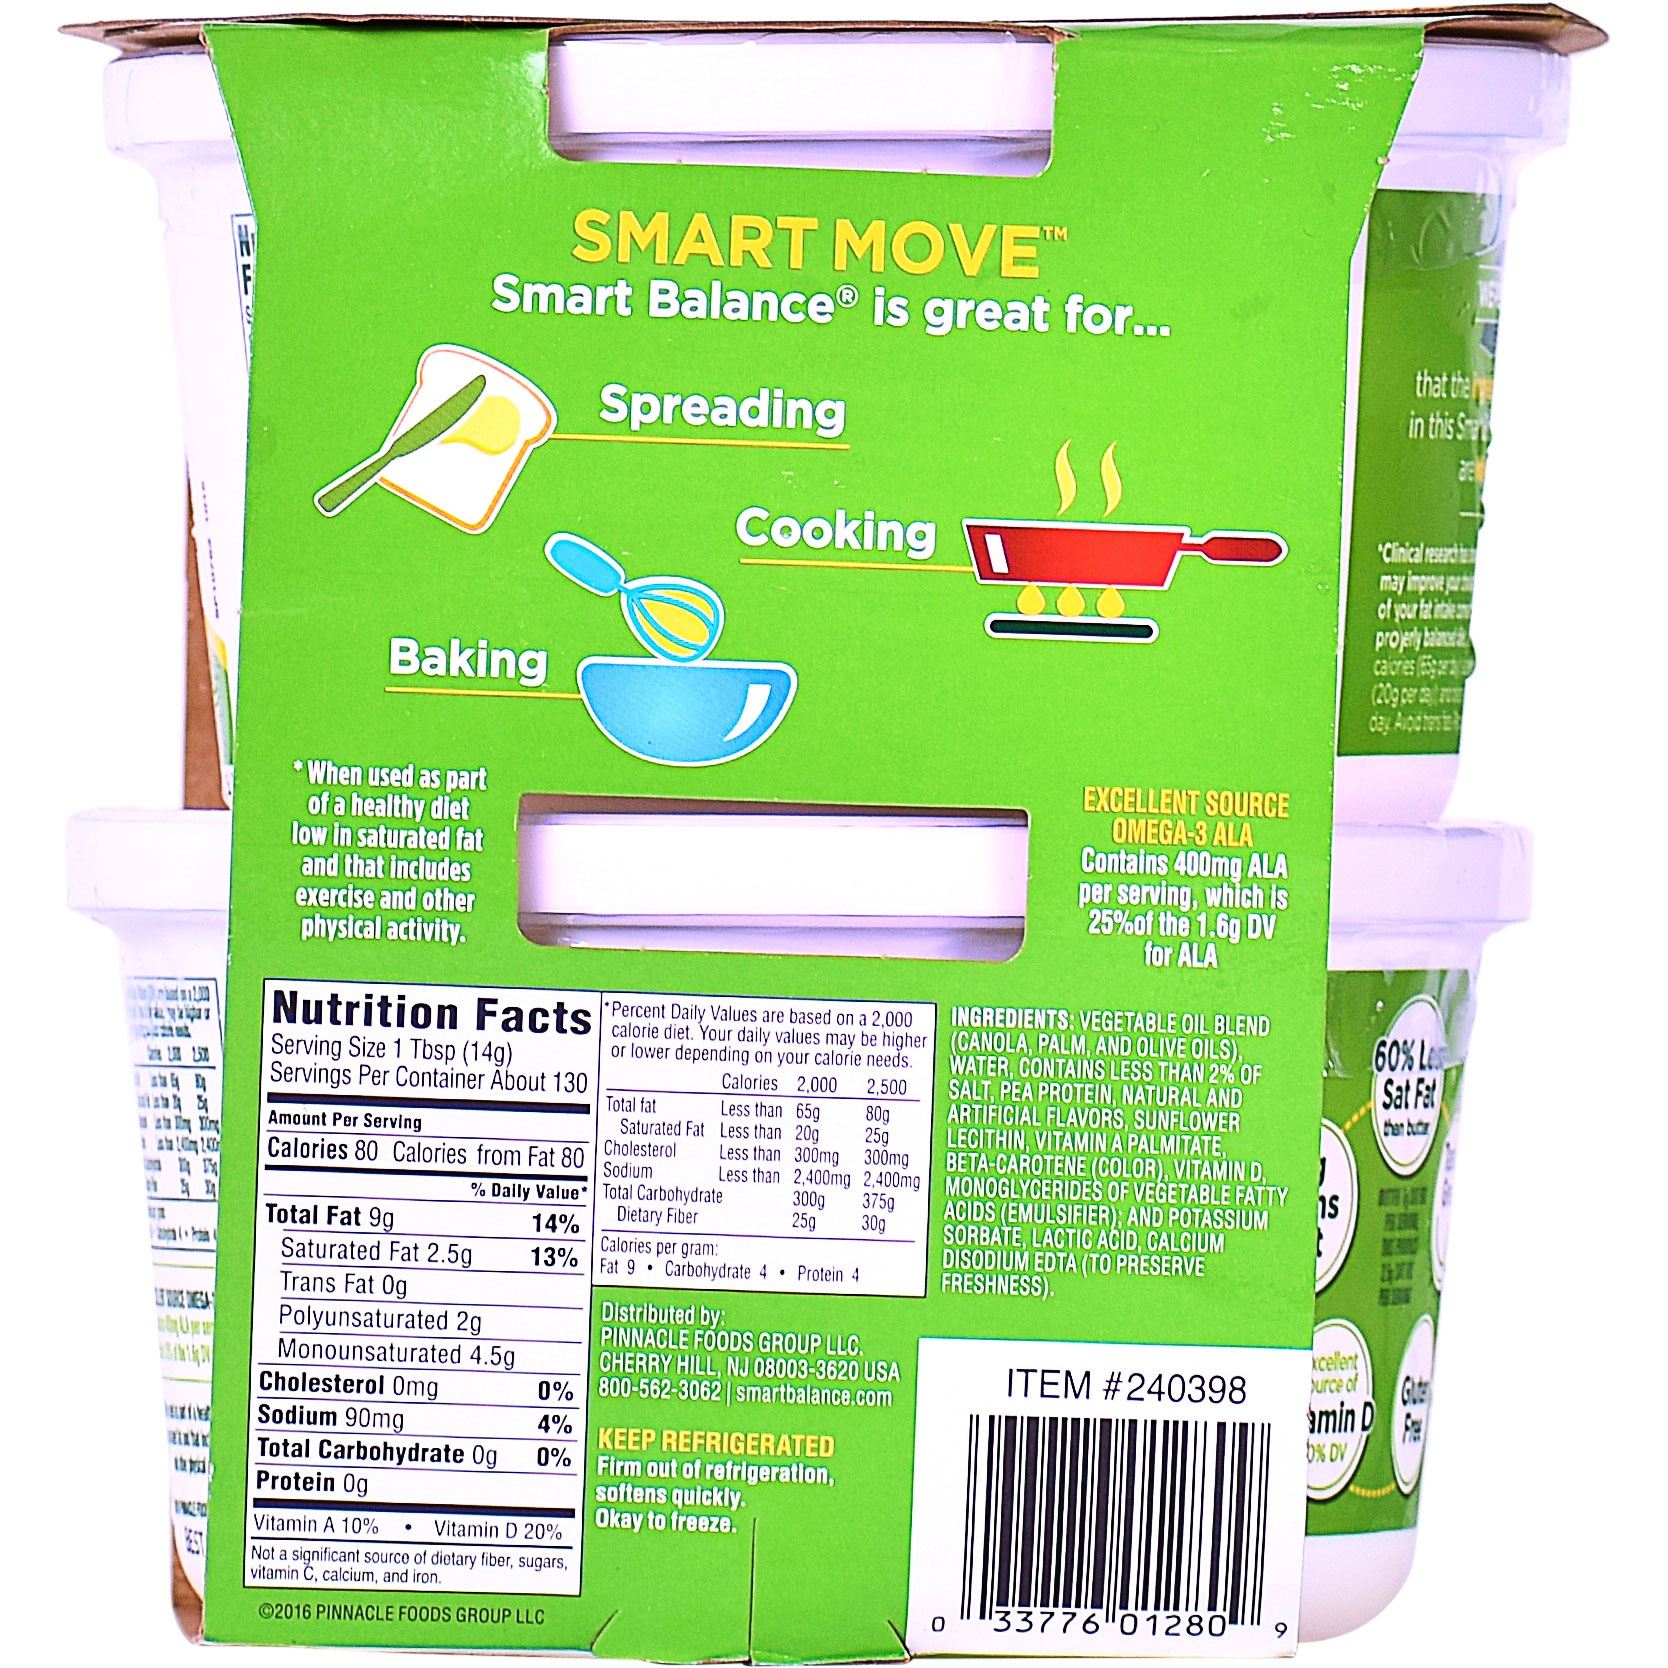 Calories in Smart Balance Original Buttery Spread and Nutrition Facts